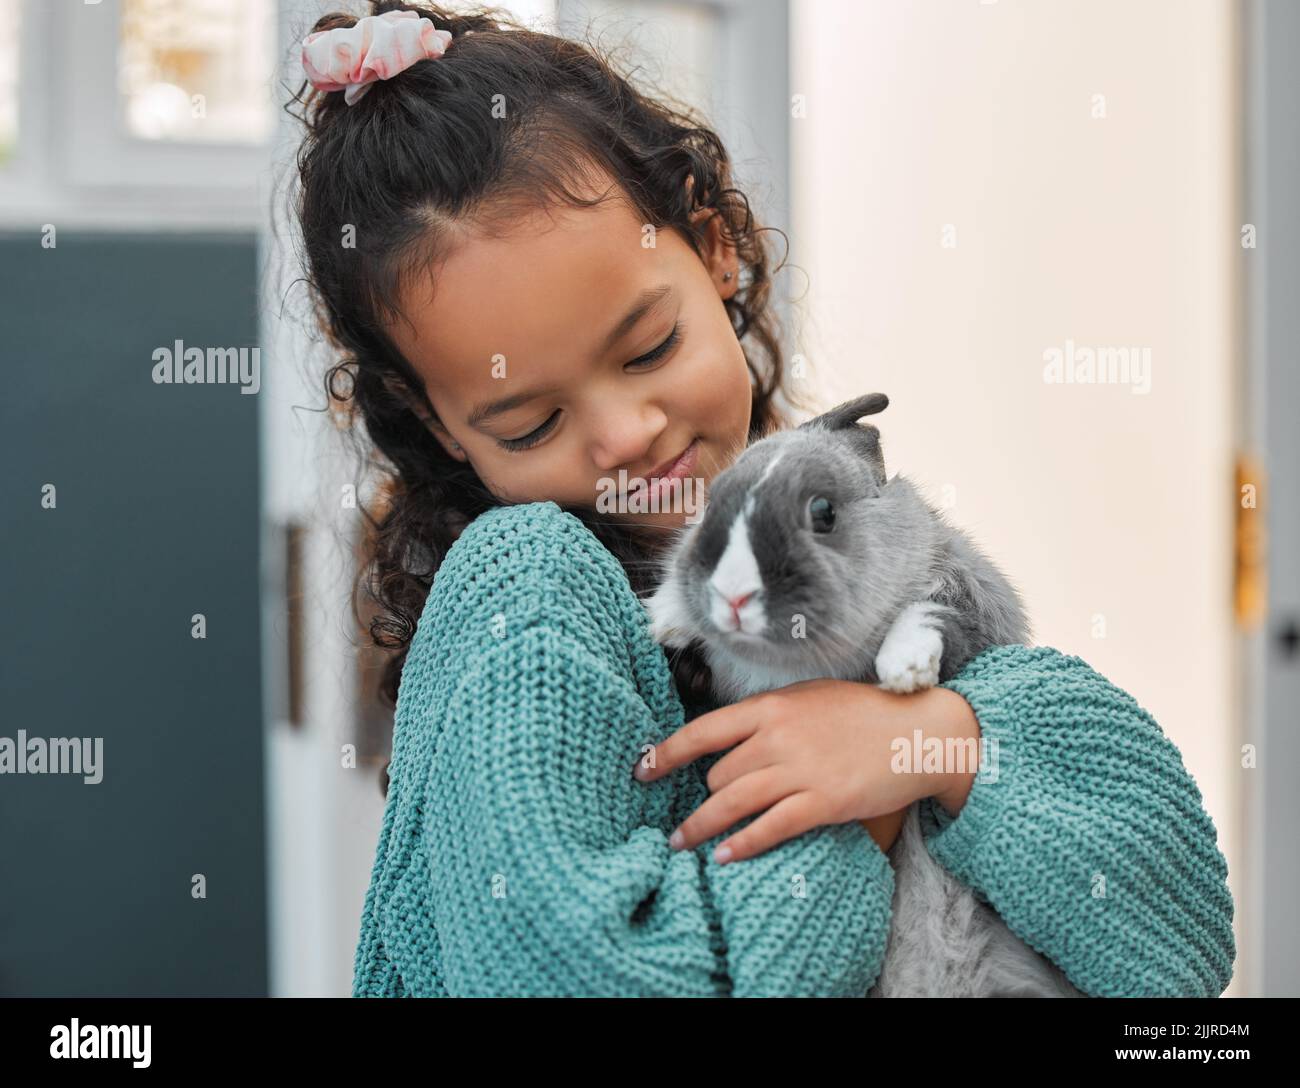 Hello there Mr Rabbit. an adorable little girl bonding with her pet rabbit at home. Stock Photo